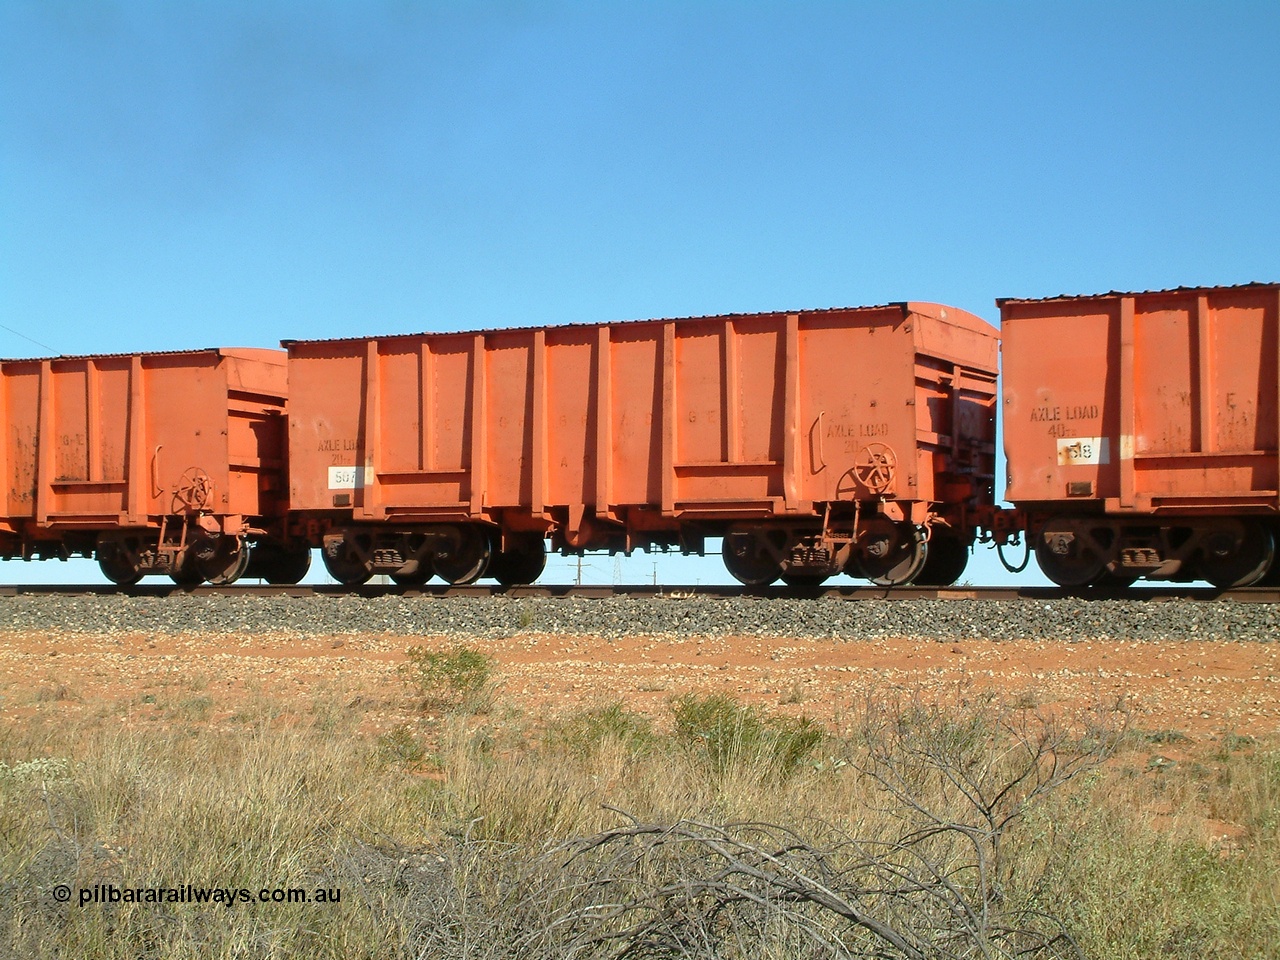 040806 092730
Goldsworthy Junction, weighbridge test waggon 507, originally built by Magor USA and ex Oroville Dam, converted by Mt Newman Mining into a 20 ton axle load test waggon.
